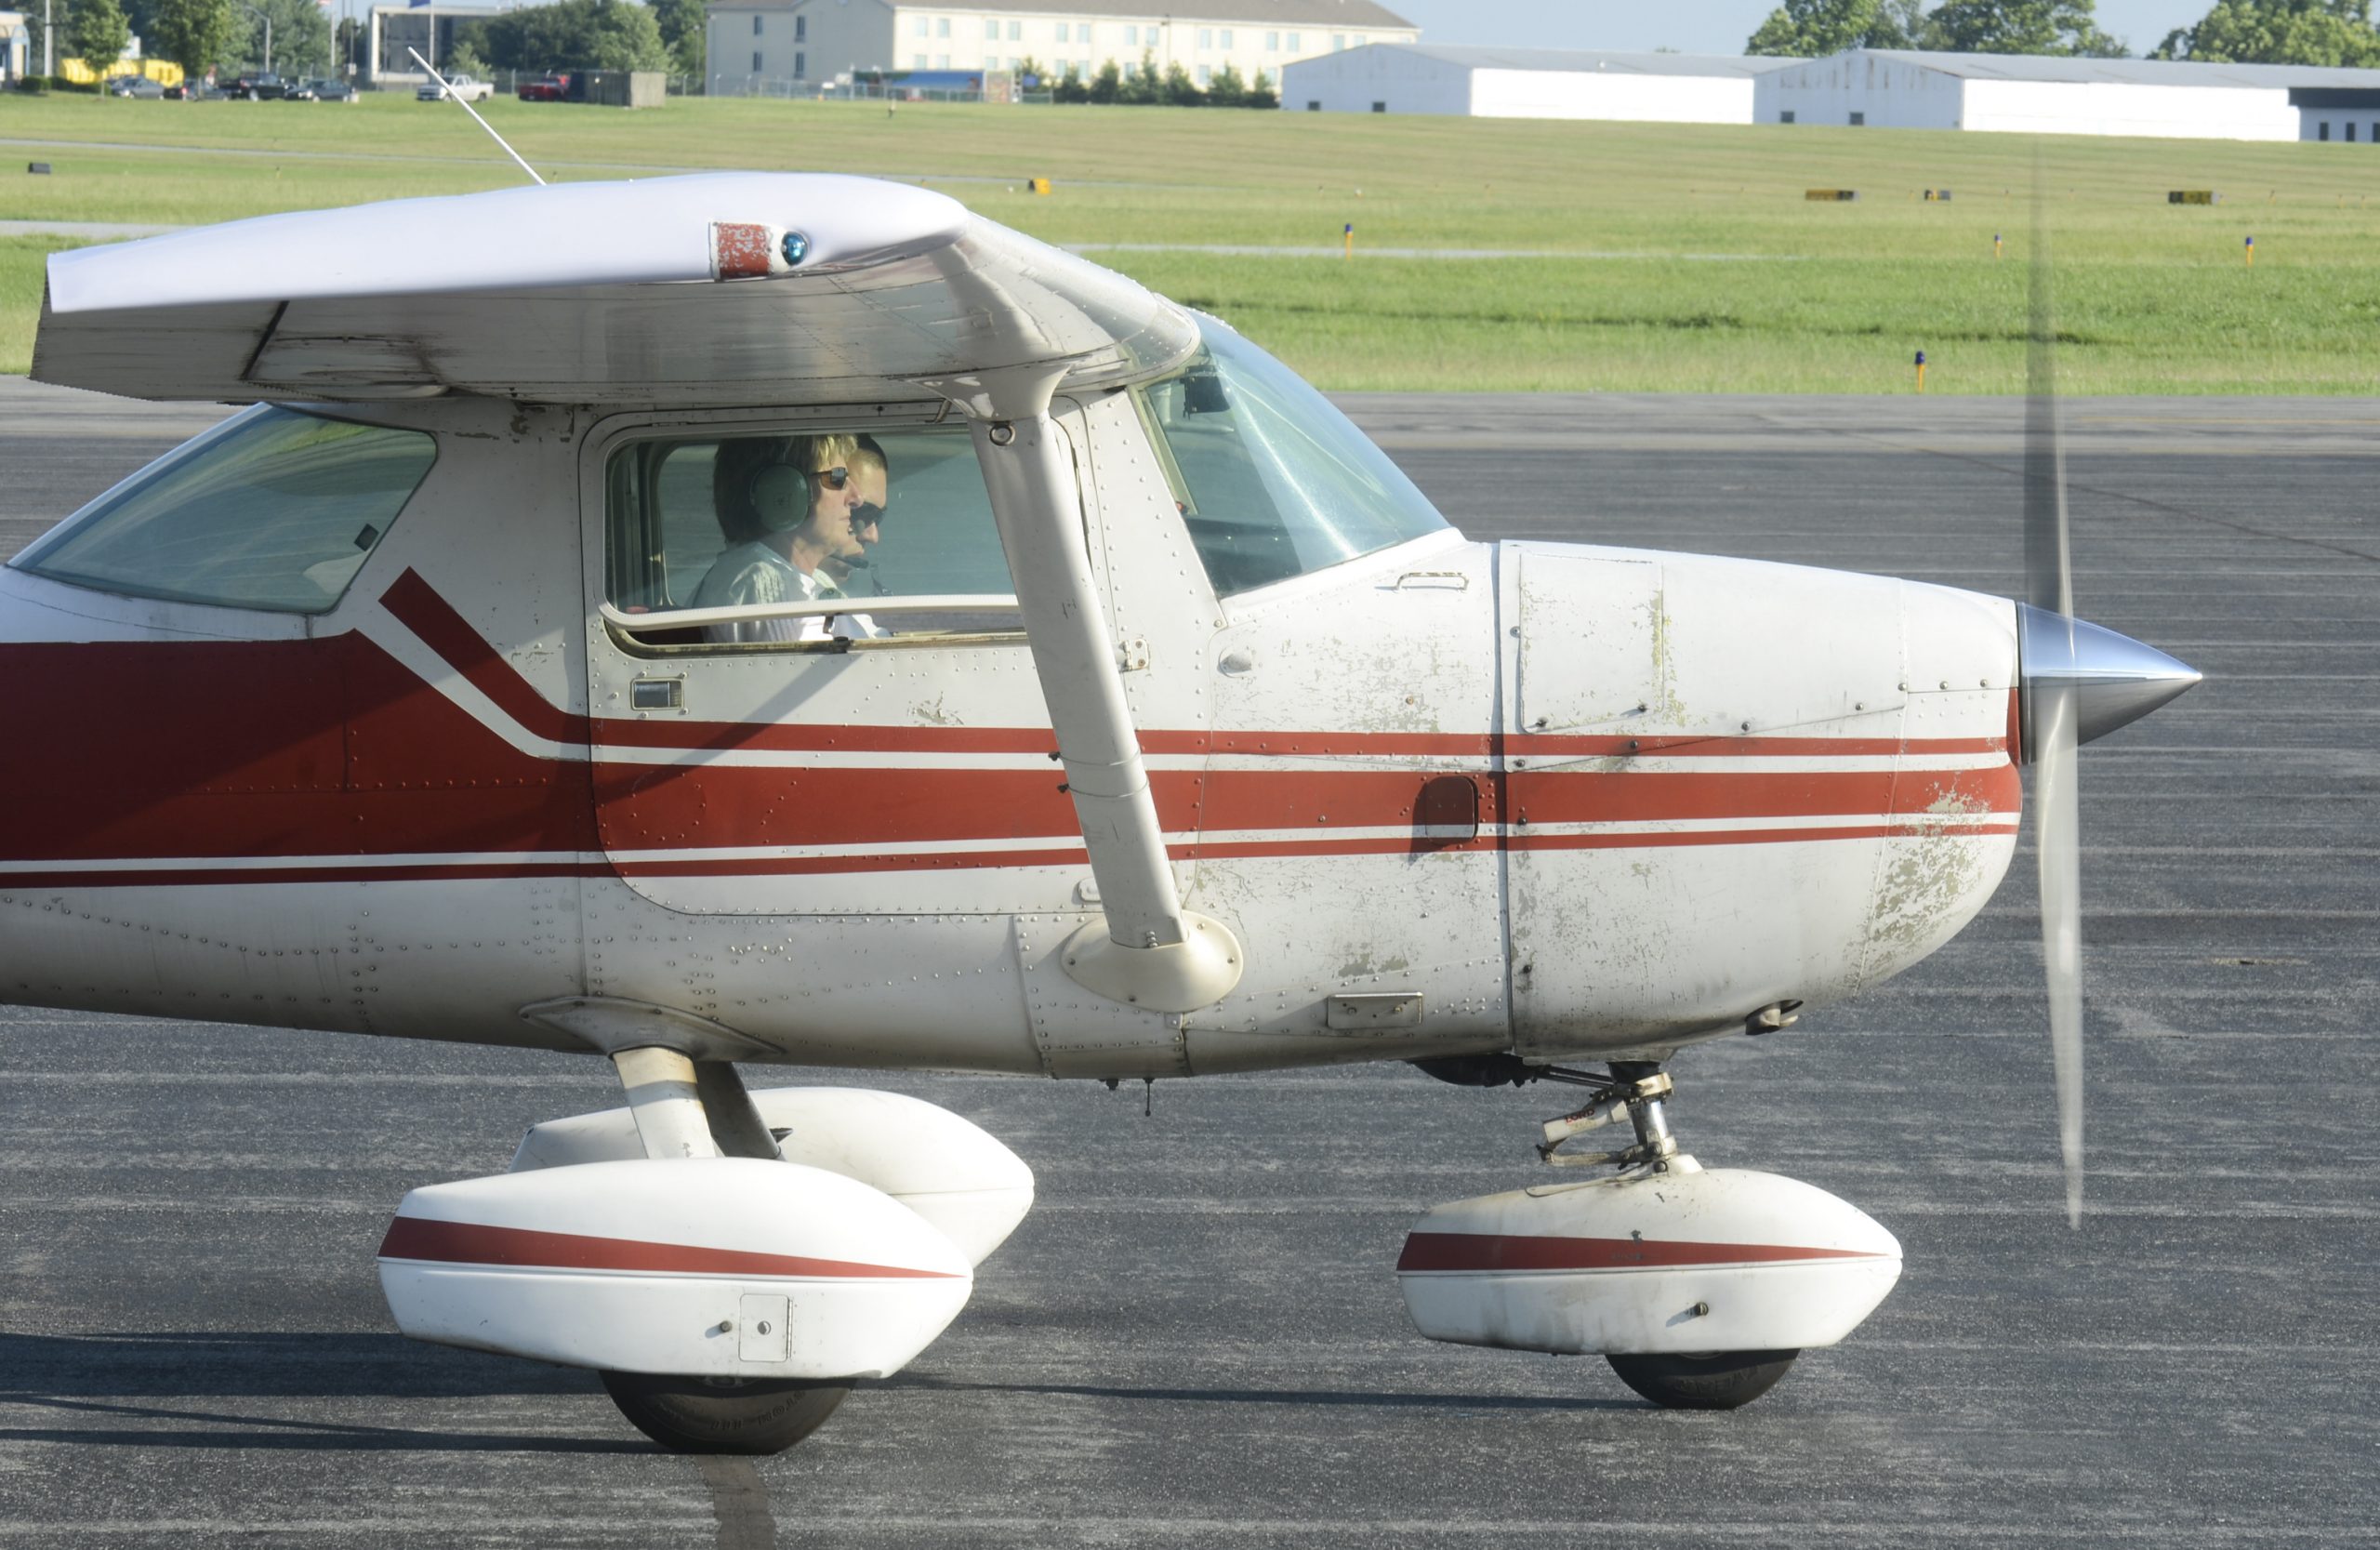 PASandra Moore in the cockpit of a Cessna 150 with her student Simon Burkhardt, of Wyomissing, on the tarmac at Reading Air Charter